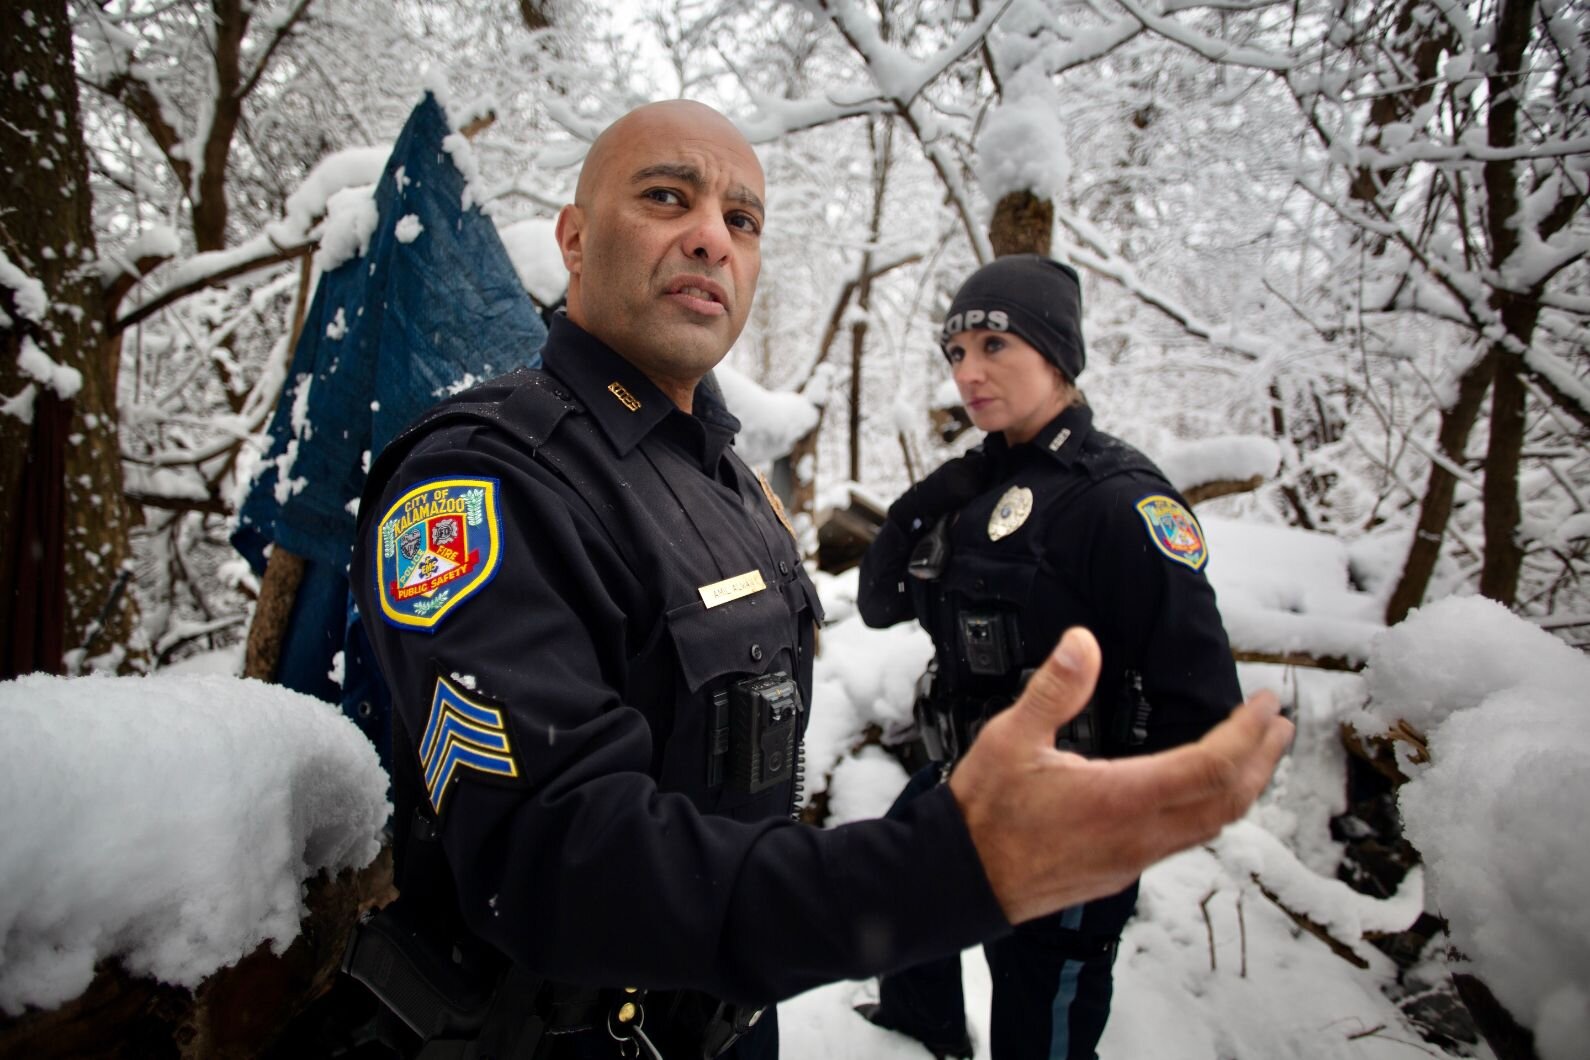 Sgt. Amil Alwan says he and members Kalamazoo Public Safety's new Community Service Team continue to find sites where unhoused people pitch tents. But the team tries to provide them with resources to find other shelter and housing.